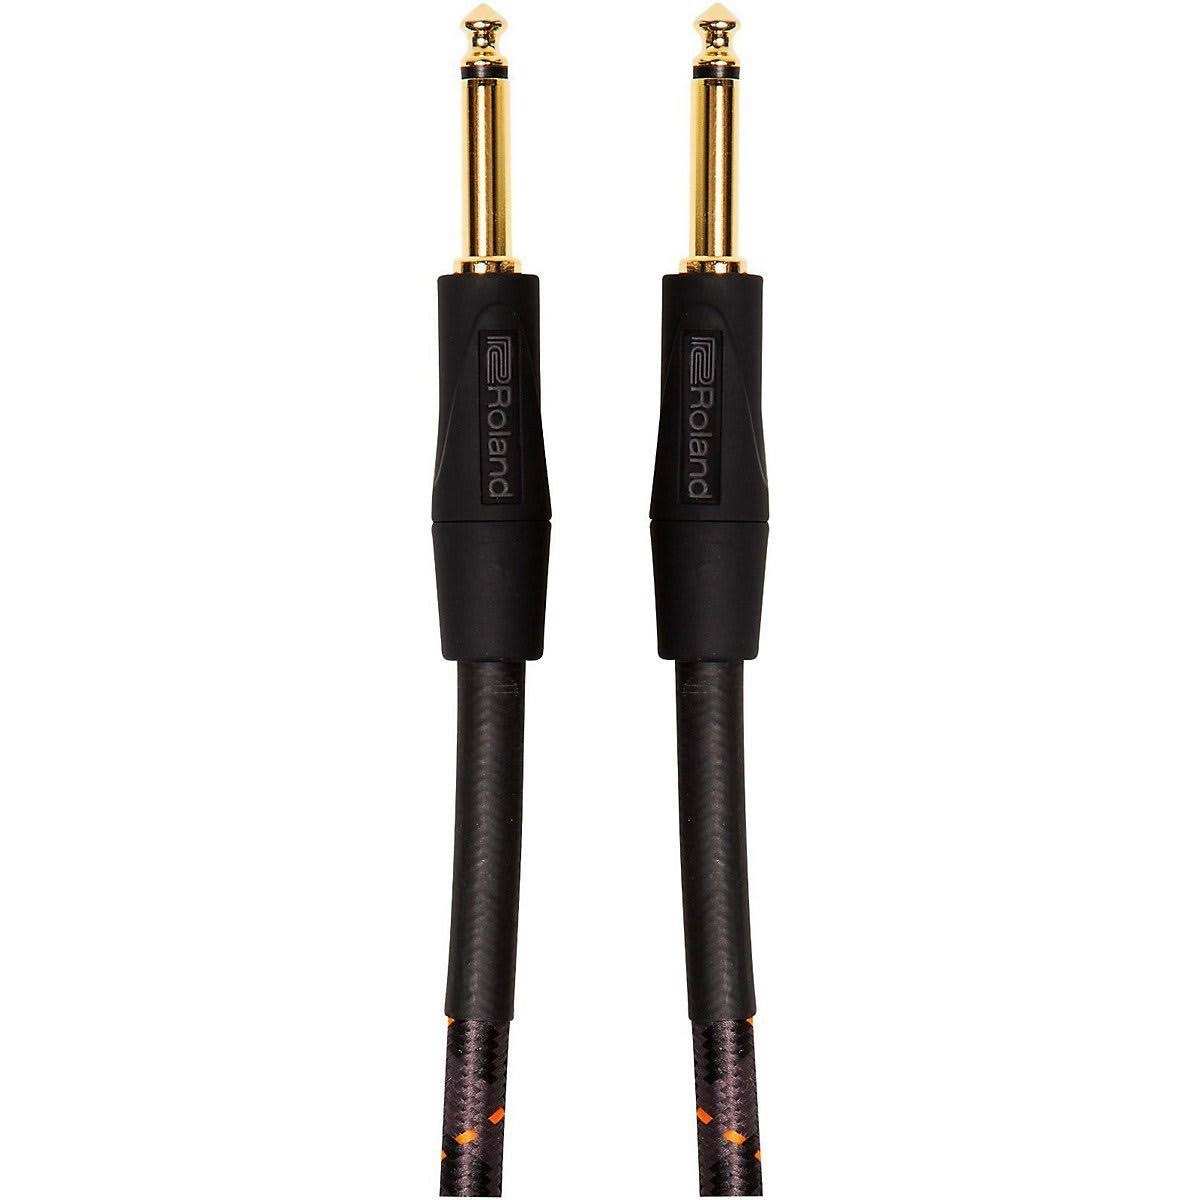 Roland RIC-G15 Gold Series Instrument Cable 15ft/4.5m - Straight 1/4-Inch Connectors